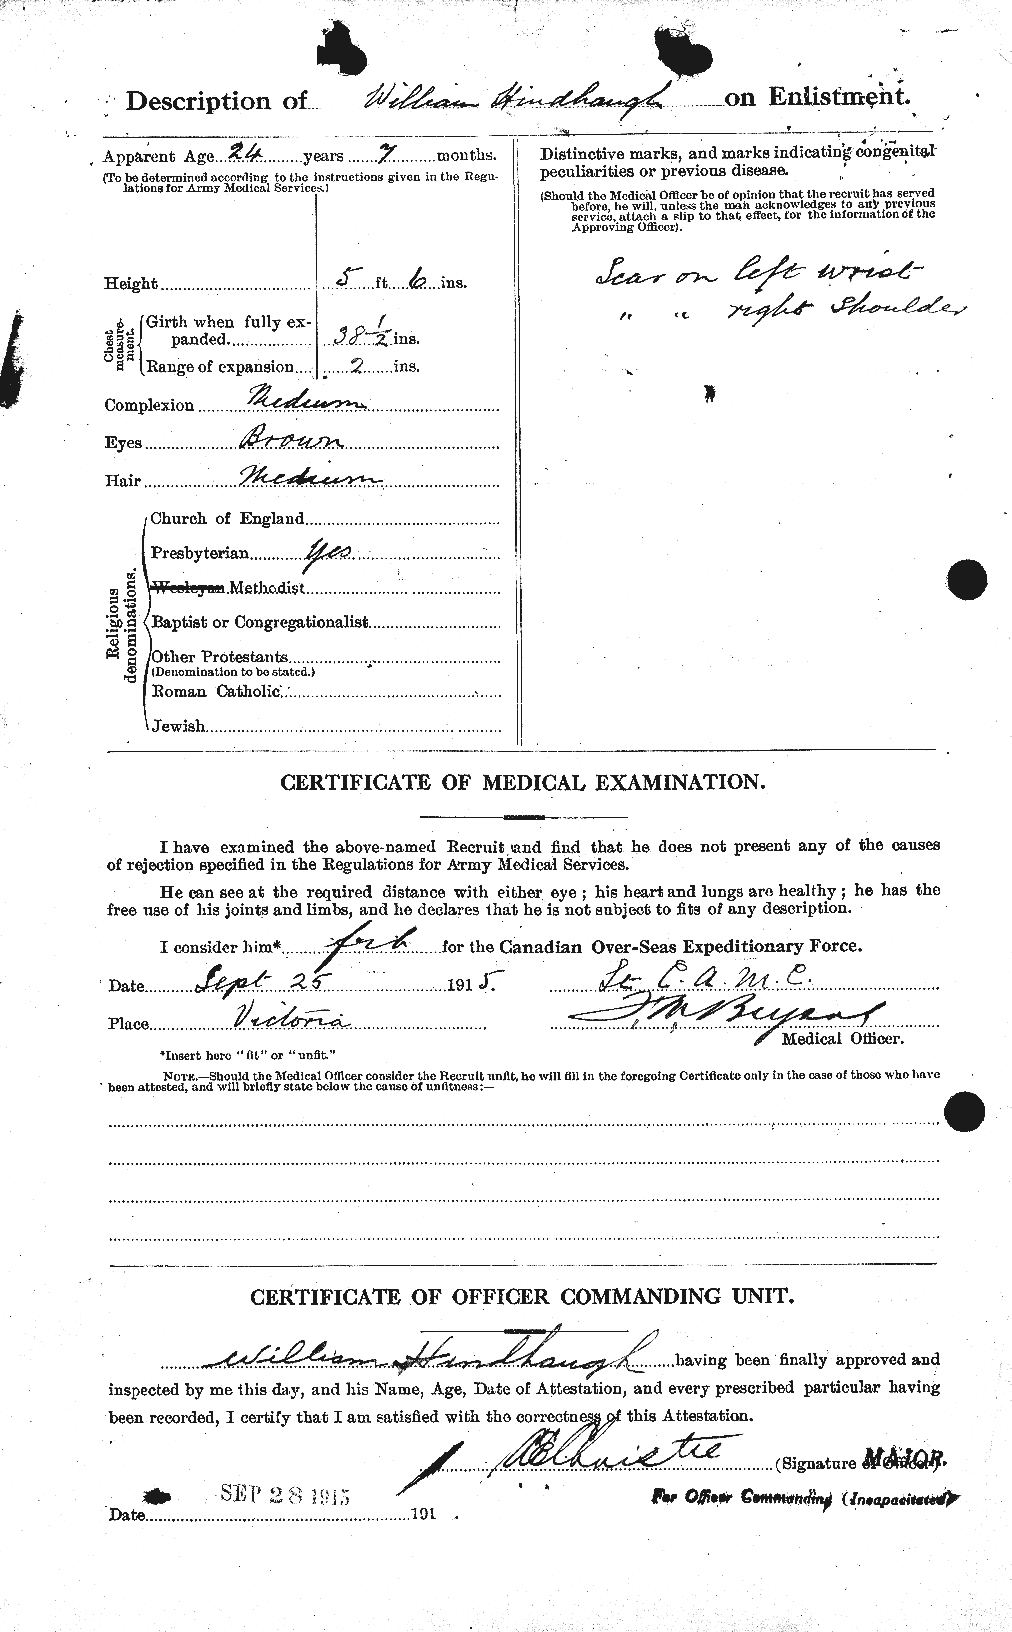 Personnel Records of the First World War - CEF 394314b